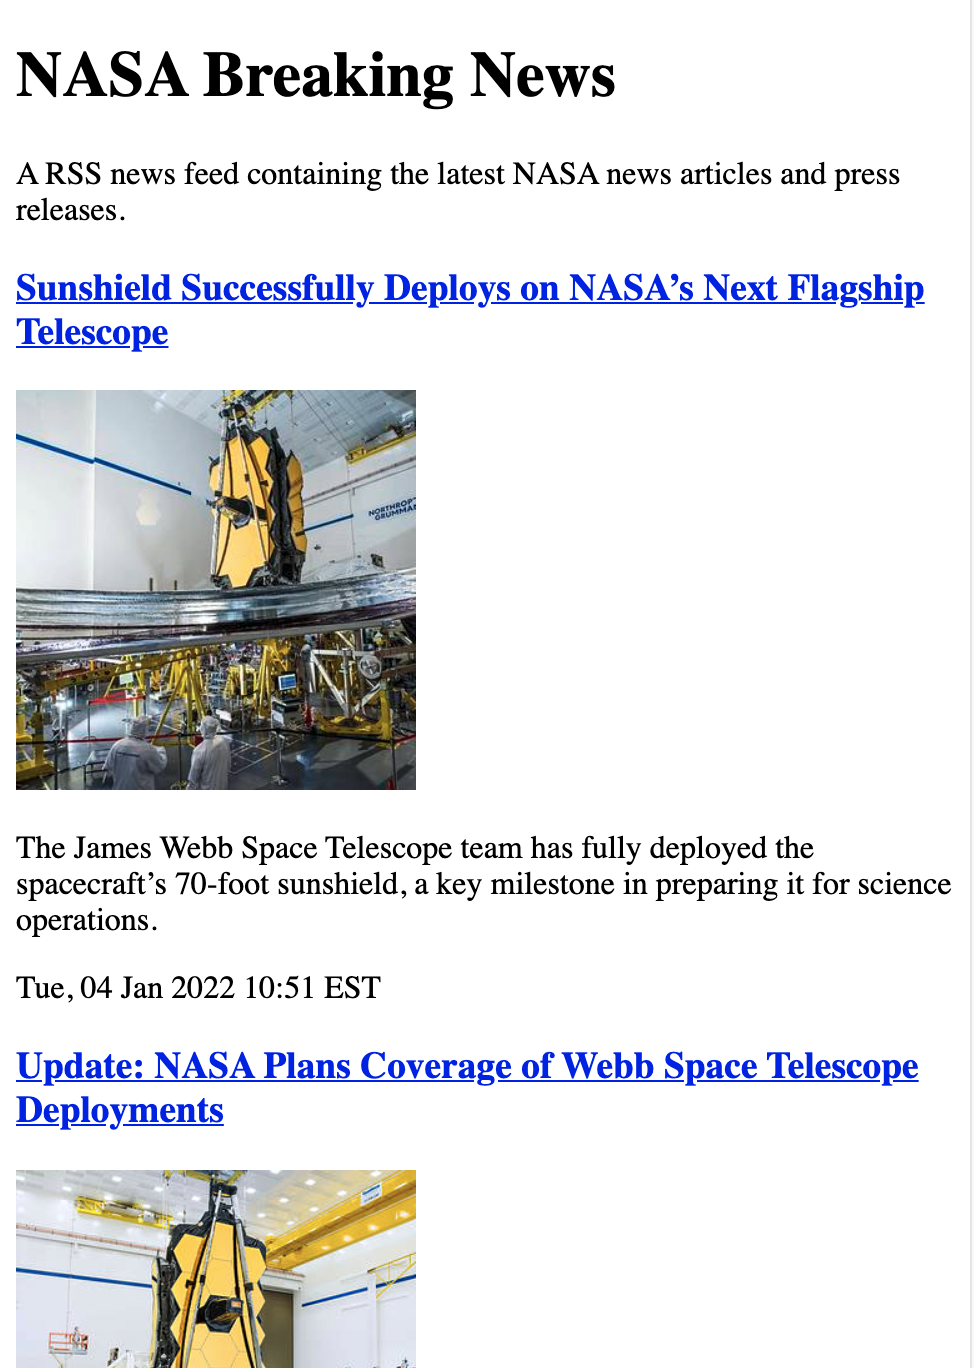 Image of a partial email, titled "NASA Breaking News". The email contains content from NASA's Breaking News RSS feed. Beneath the title is a description reading: "A RSS news feed containing the latest NASA news articles and press releases." Below are a series of recent news stories each with title, link, image, summary paragraph, and timestamp